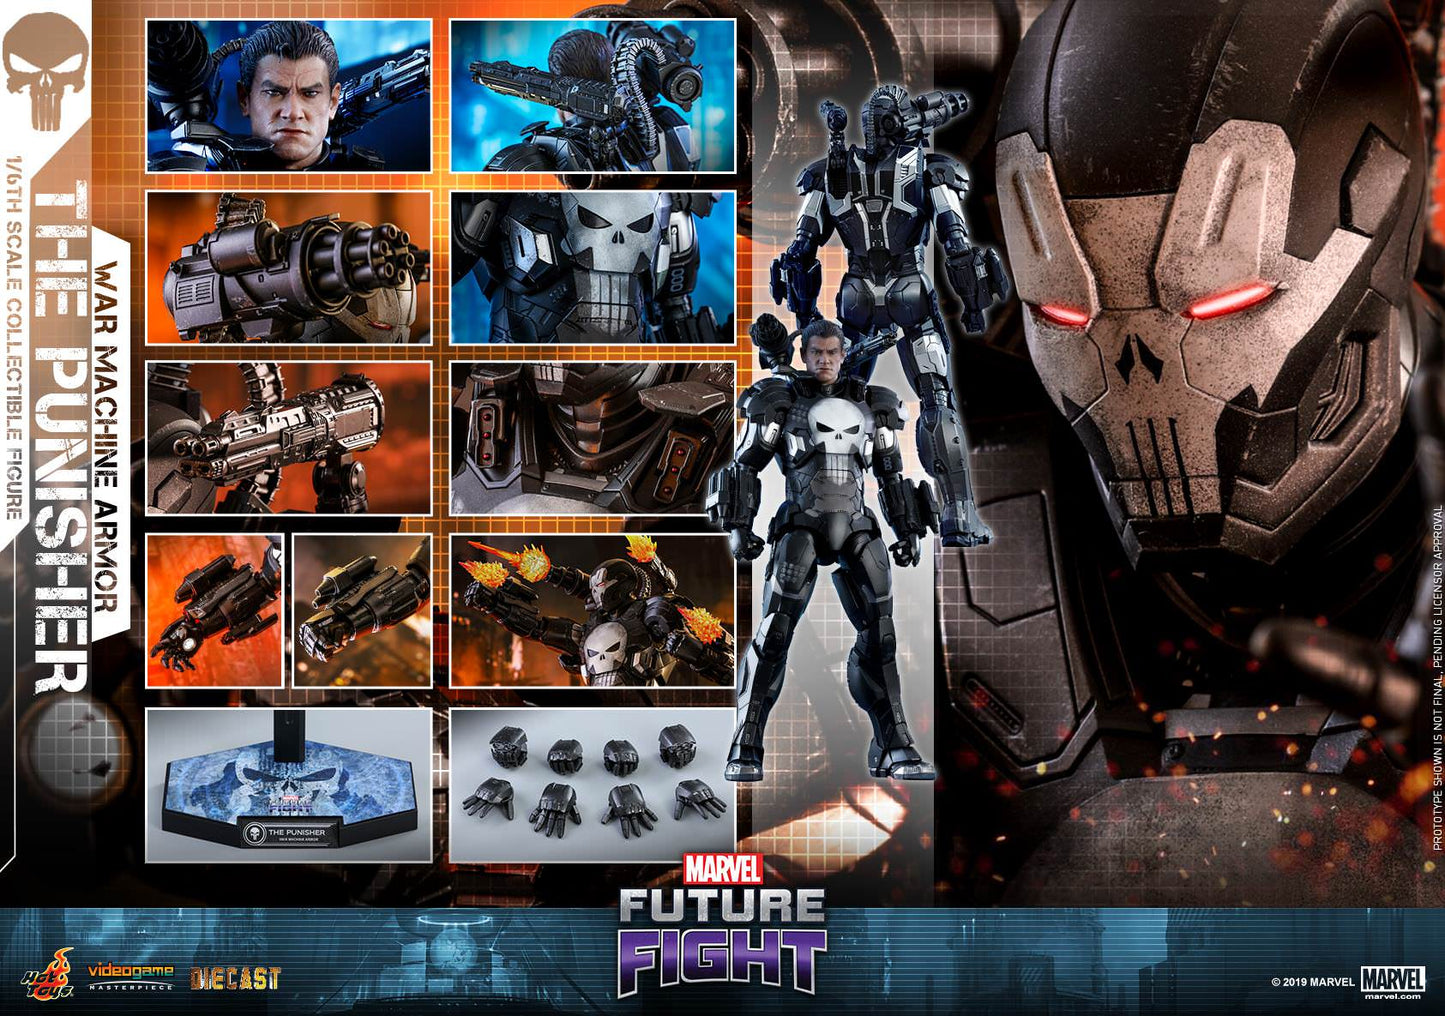 The Punisher War Machine Armor 1/6 - Marvel Future Fight Hot Toys